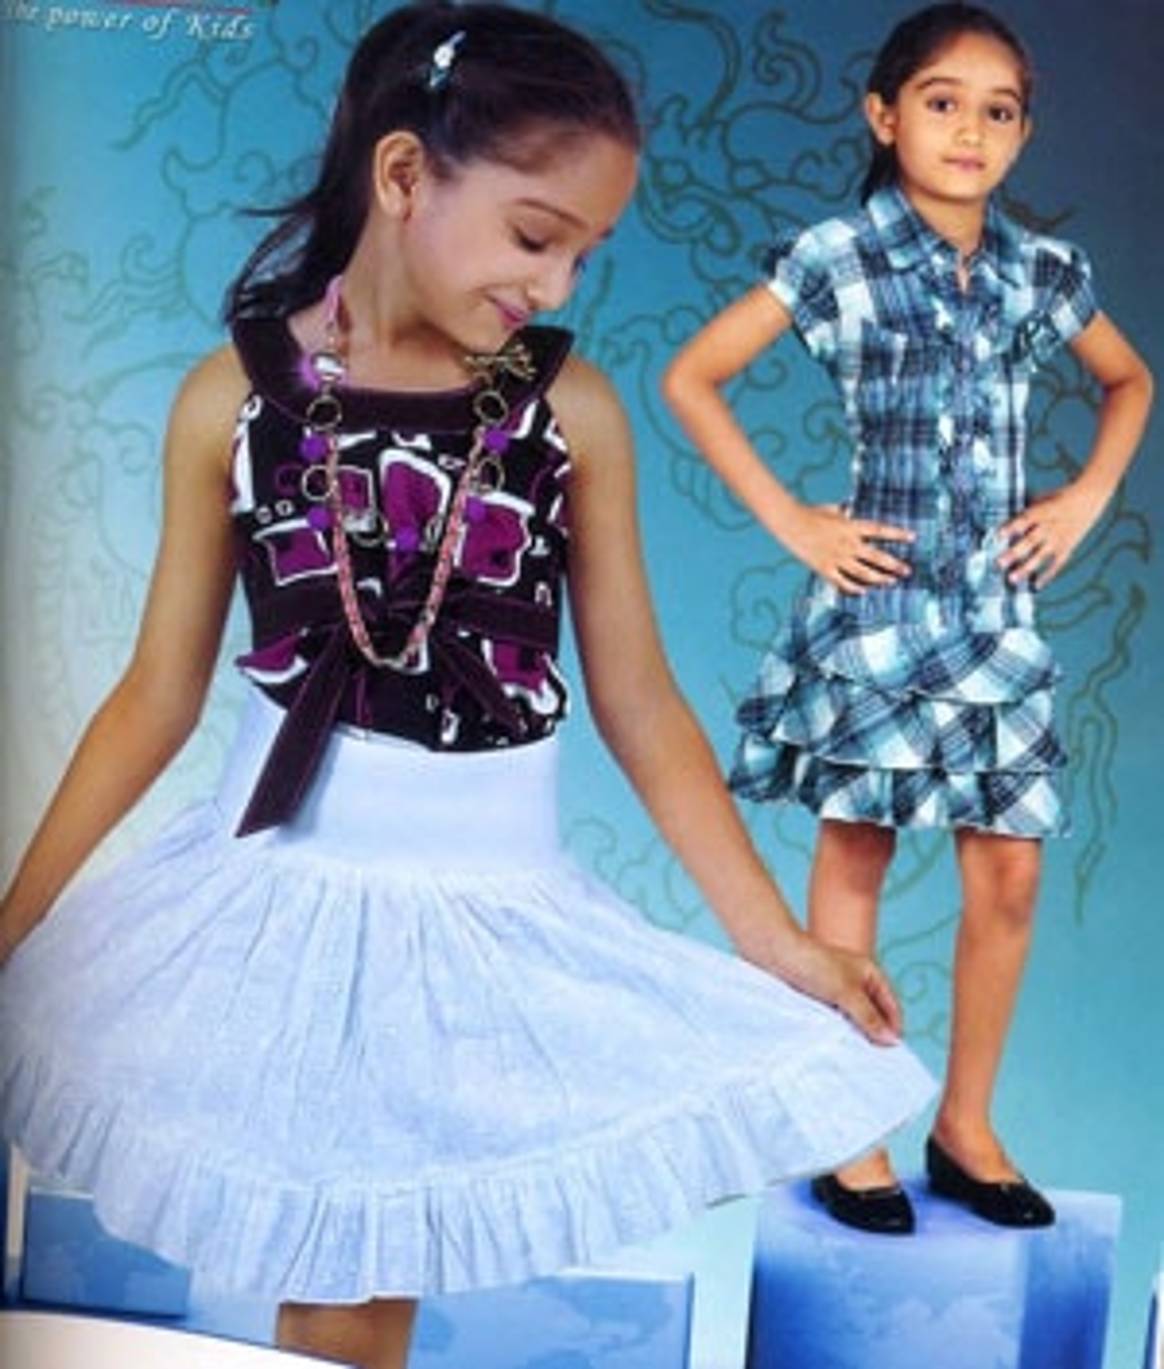 Power Clothing: Dressing up children with adult concepts